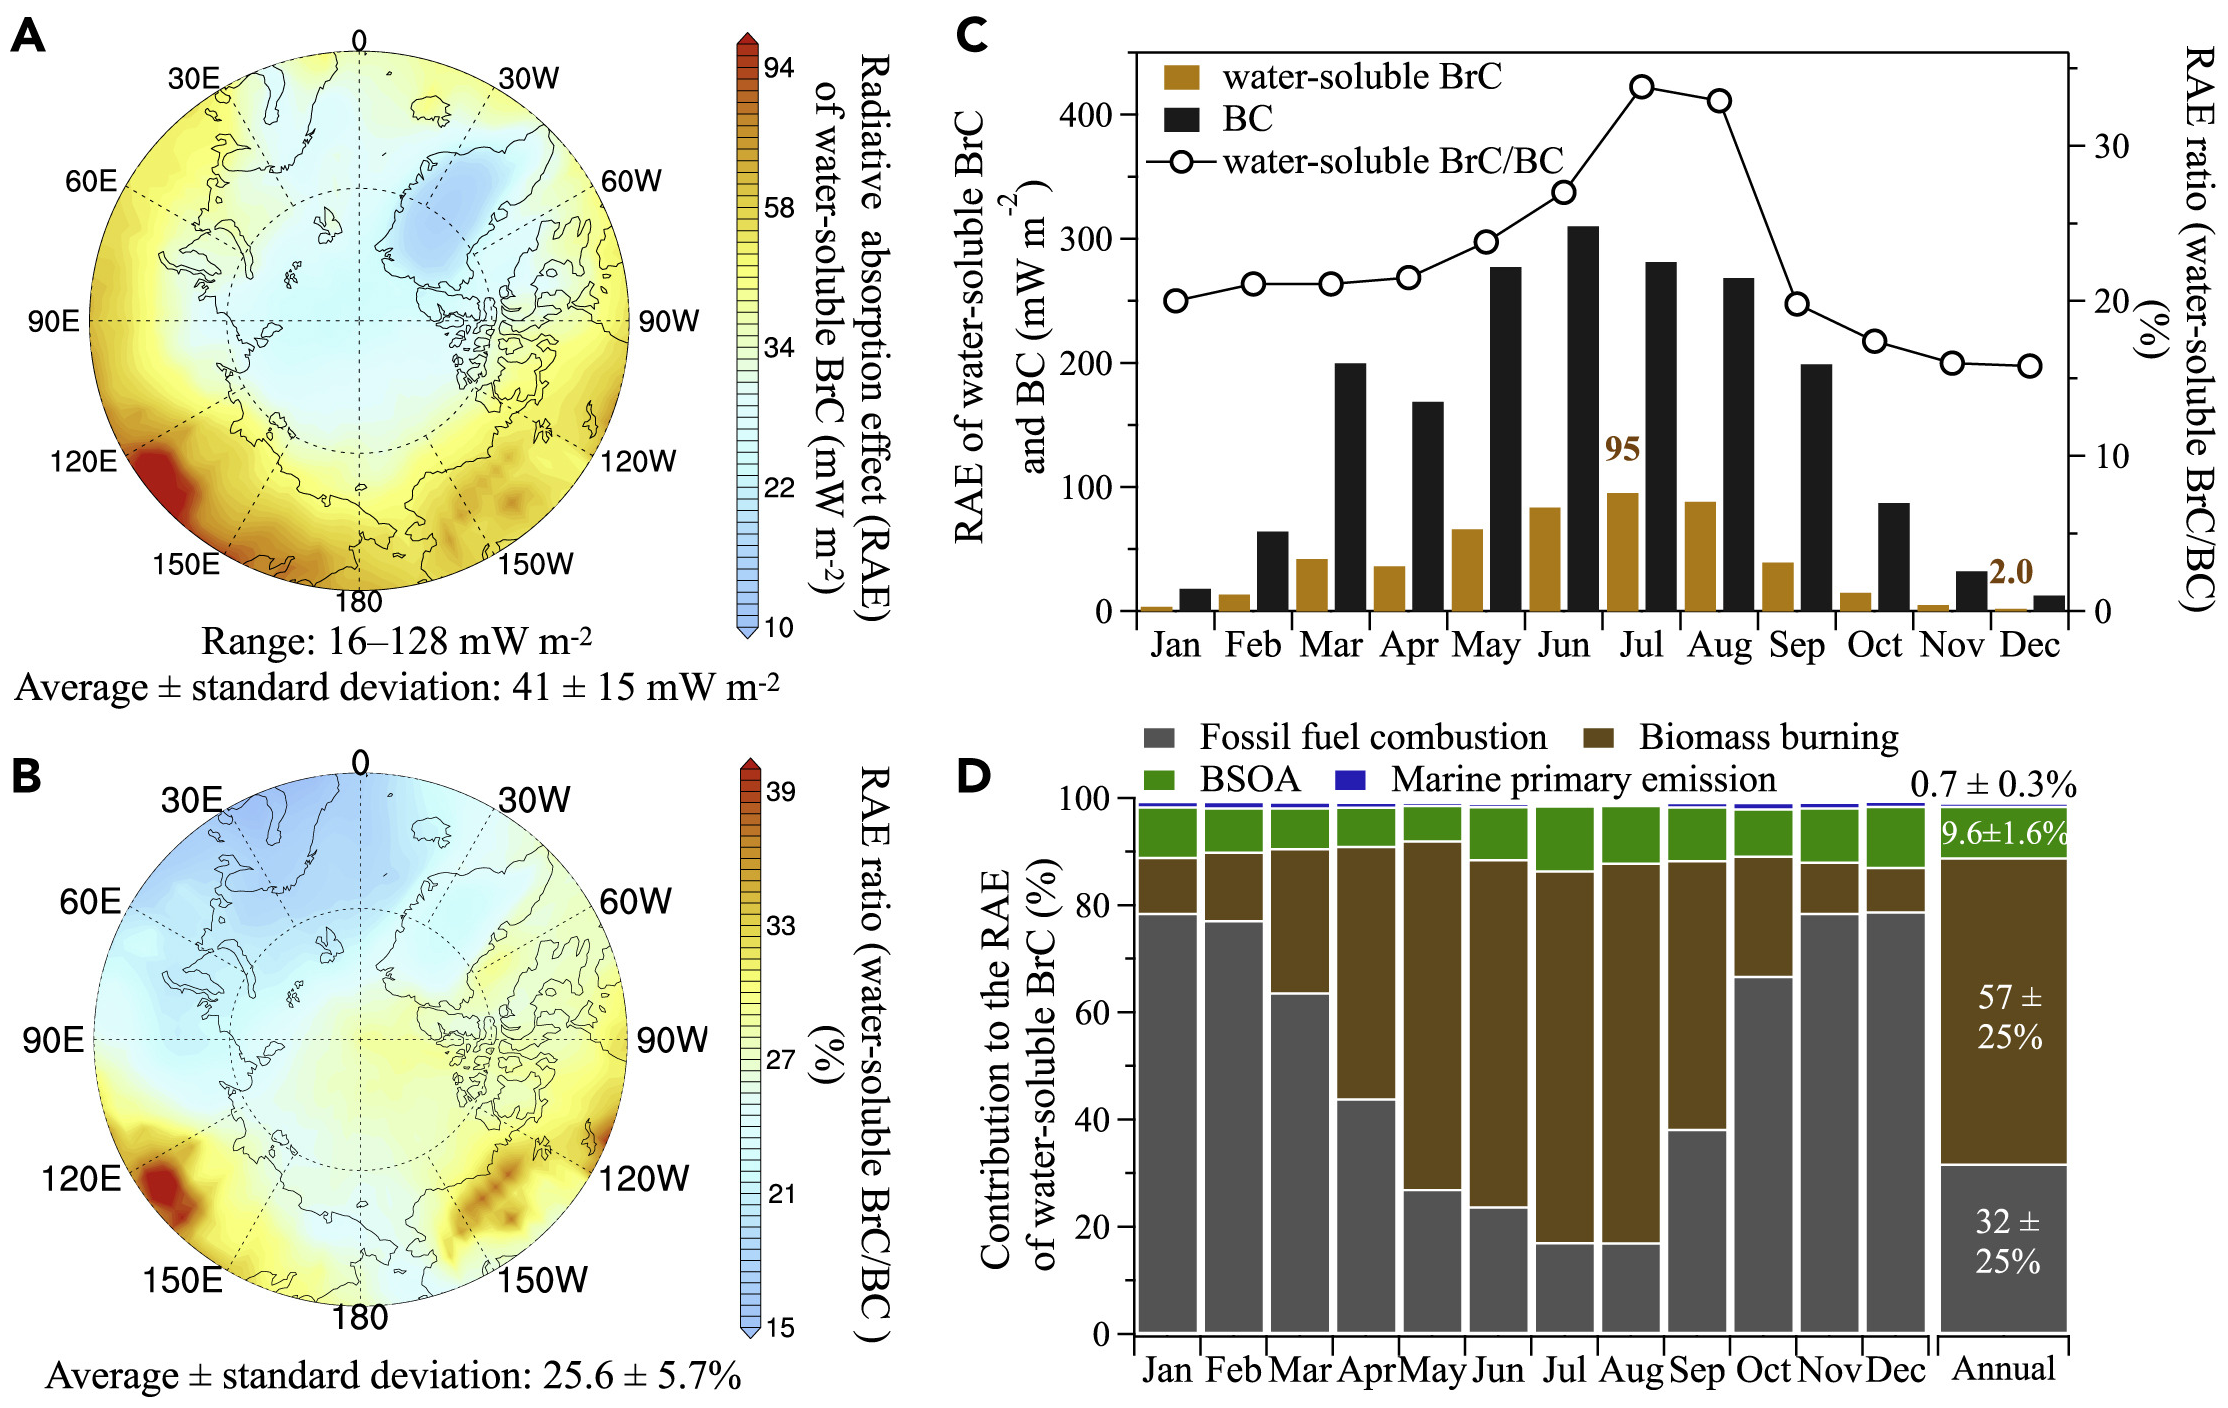 Strong impact of water-soluble brown carbon (BrC) on simulated Arctic warming. (A) Annual average radiative absorption effect (RAE) of water-soluble BrC in the Arctic (north of 60°N). (B) Annual average of the fractional RAE of water-soluble BrC relative to BC in the Arctic. (C) Monthly variation of the RAE of water-soluble BrC and BC as well as the fractional RAE of water-soluble BrC relative to BC. The highest and lowest value for the monthly RAE of water-soluble BrC are shown for July and December, respectively. (D) Monthly and annual average contribution from the four sources to the RAE of water-soluble BrC. These plots present the strong impact of water-soluble BrC on circum-Arctic warming, especially the high contribution from biomass burning. Graphic: Yue, et al., 2022 / One Earth